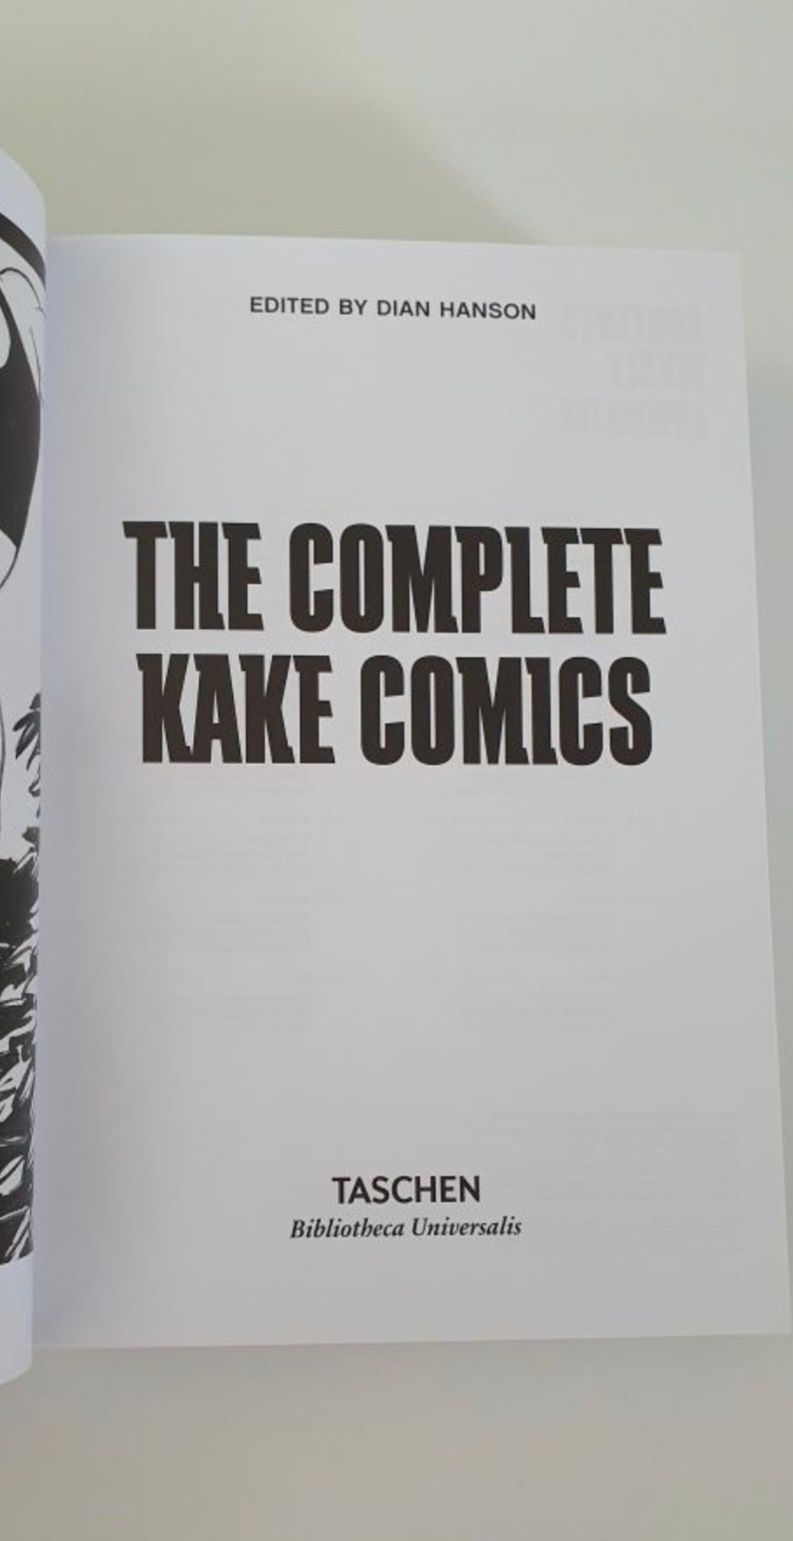 Tom of Finland The Complete Kake Comics Taschen gay